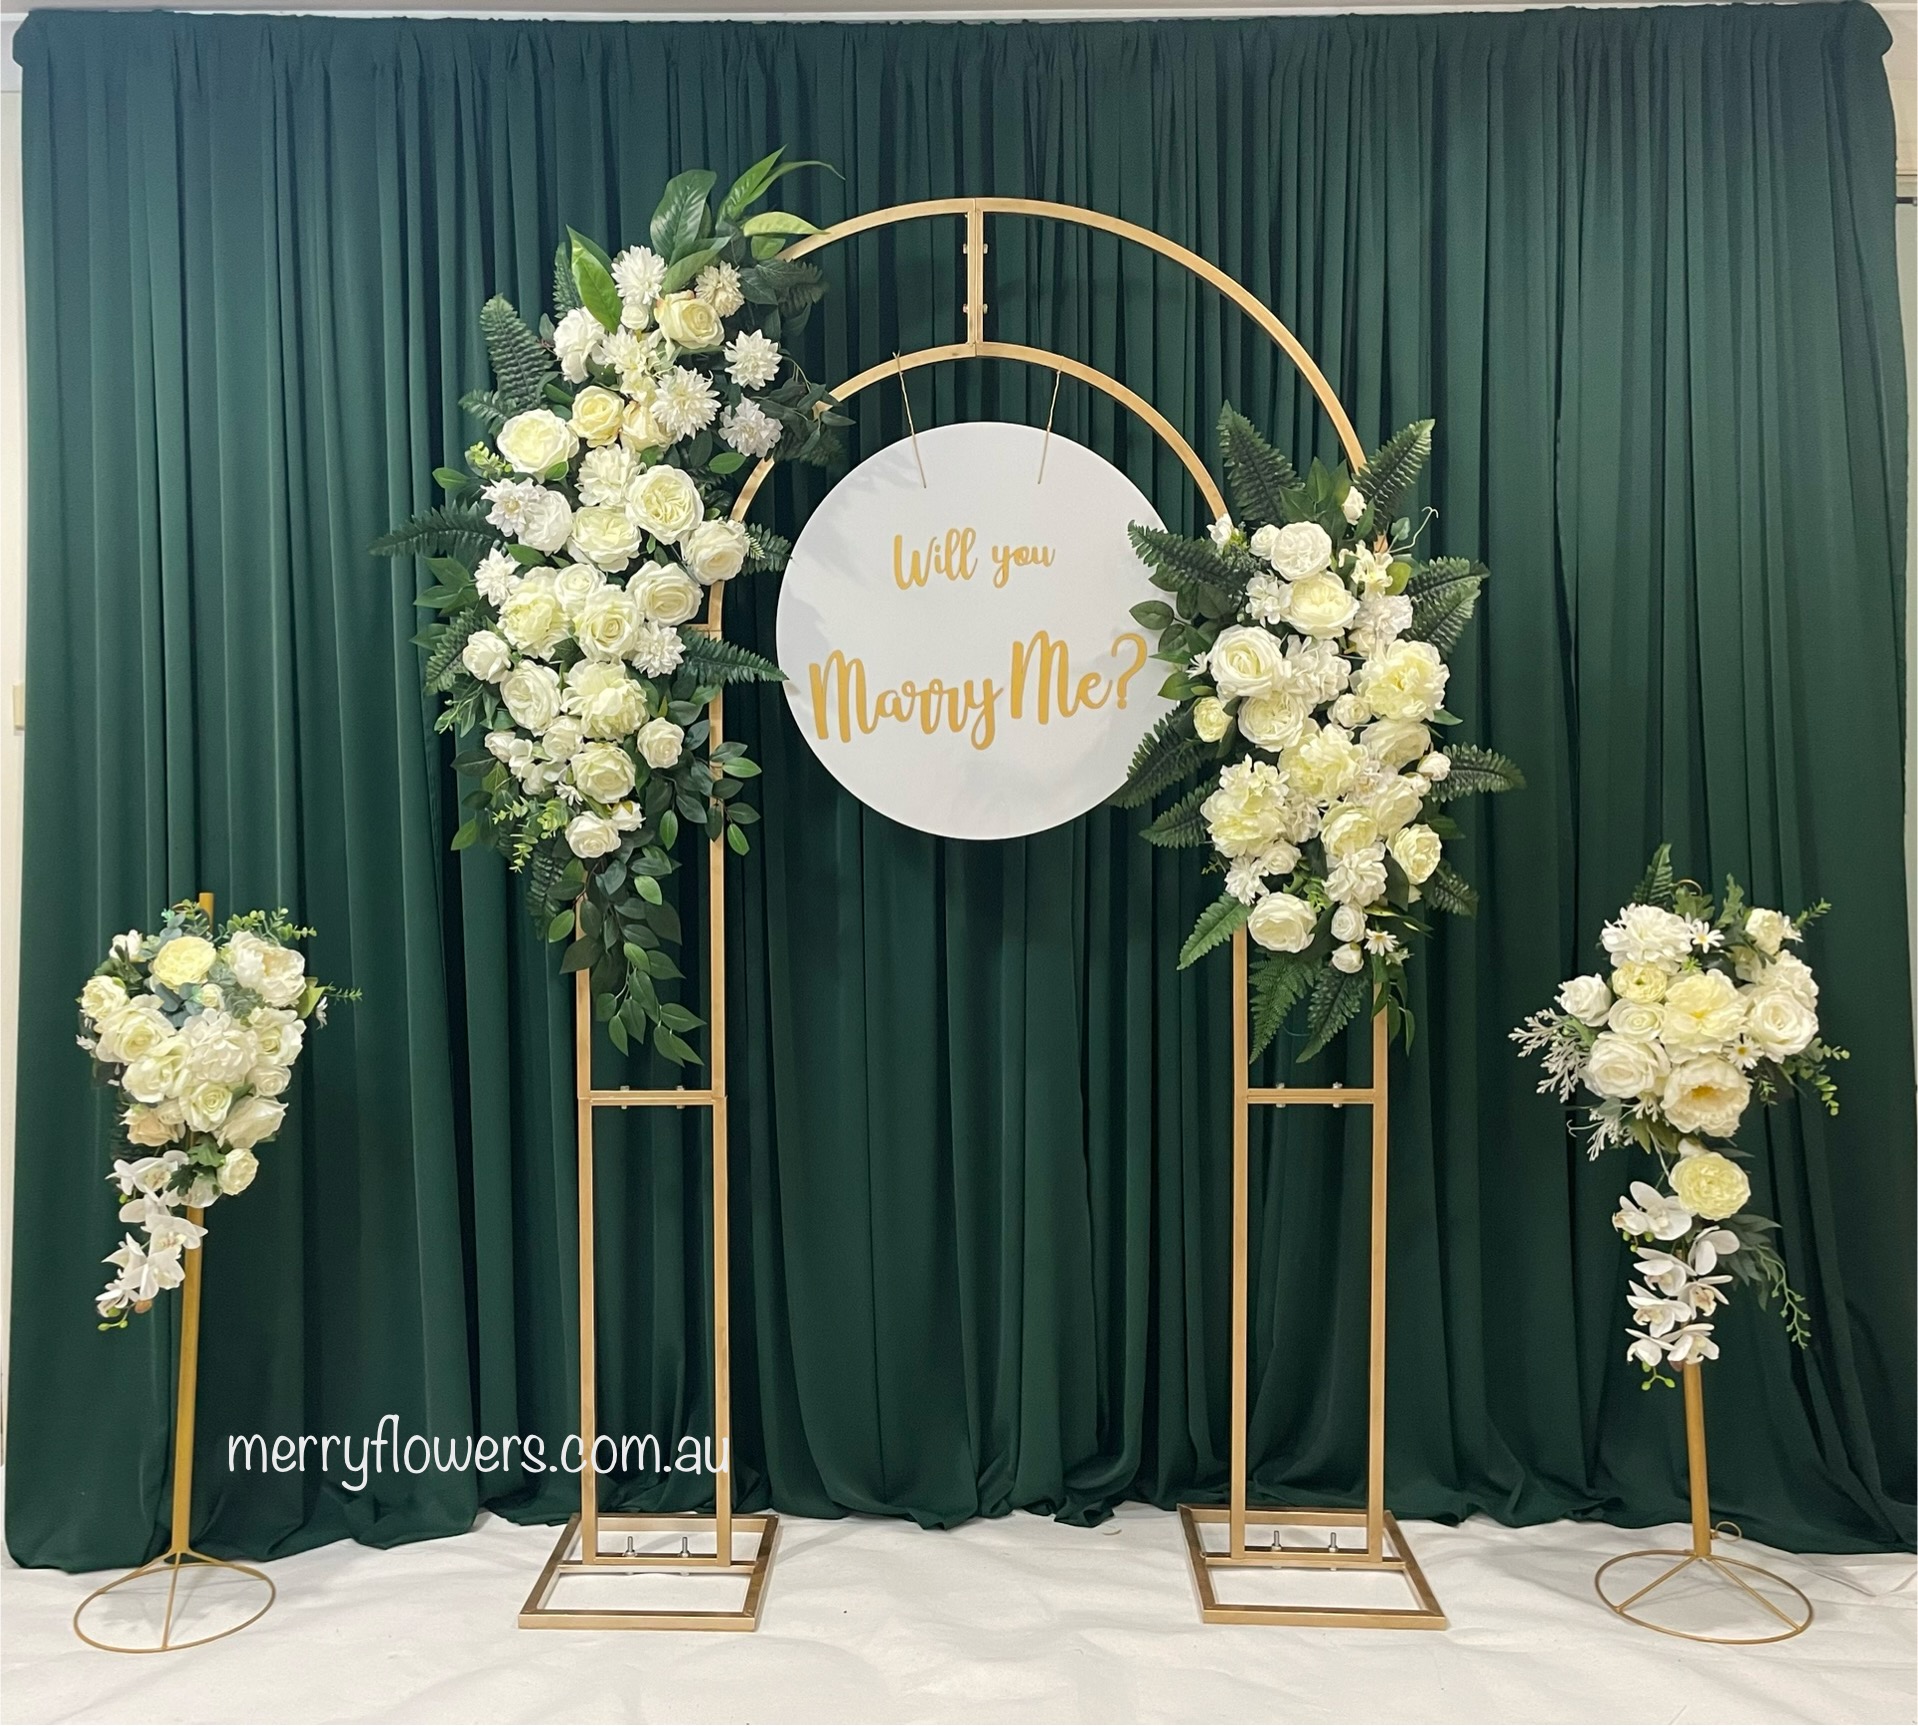 A17 – Gold Arch with White and Green Flowers